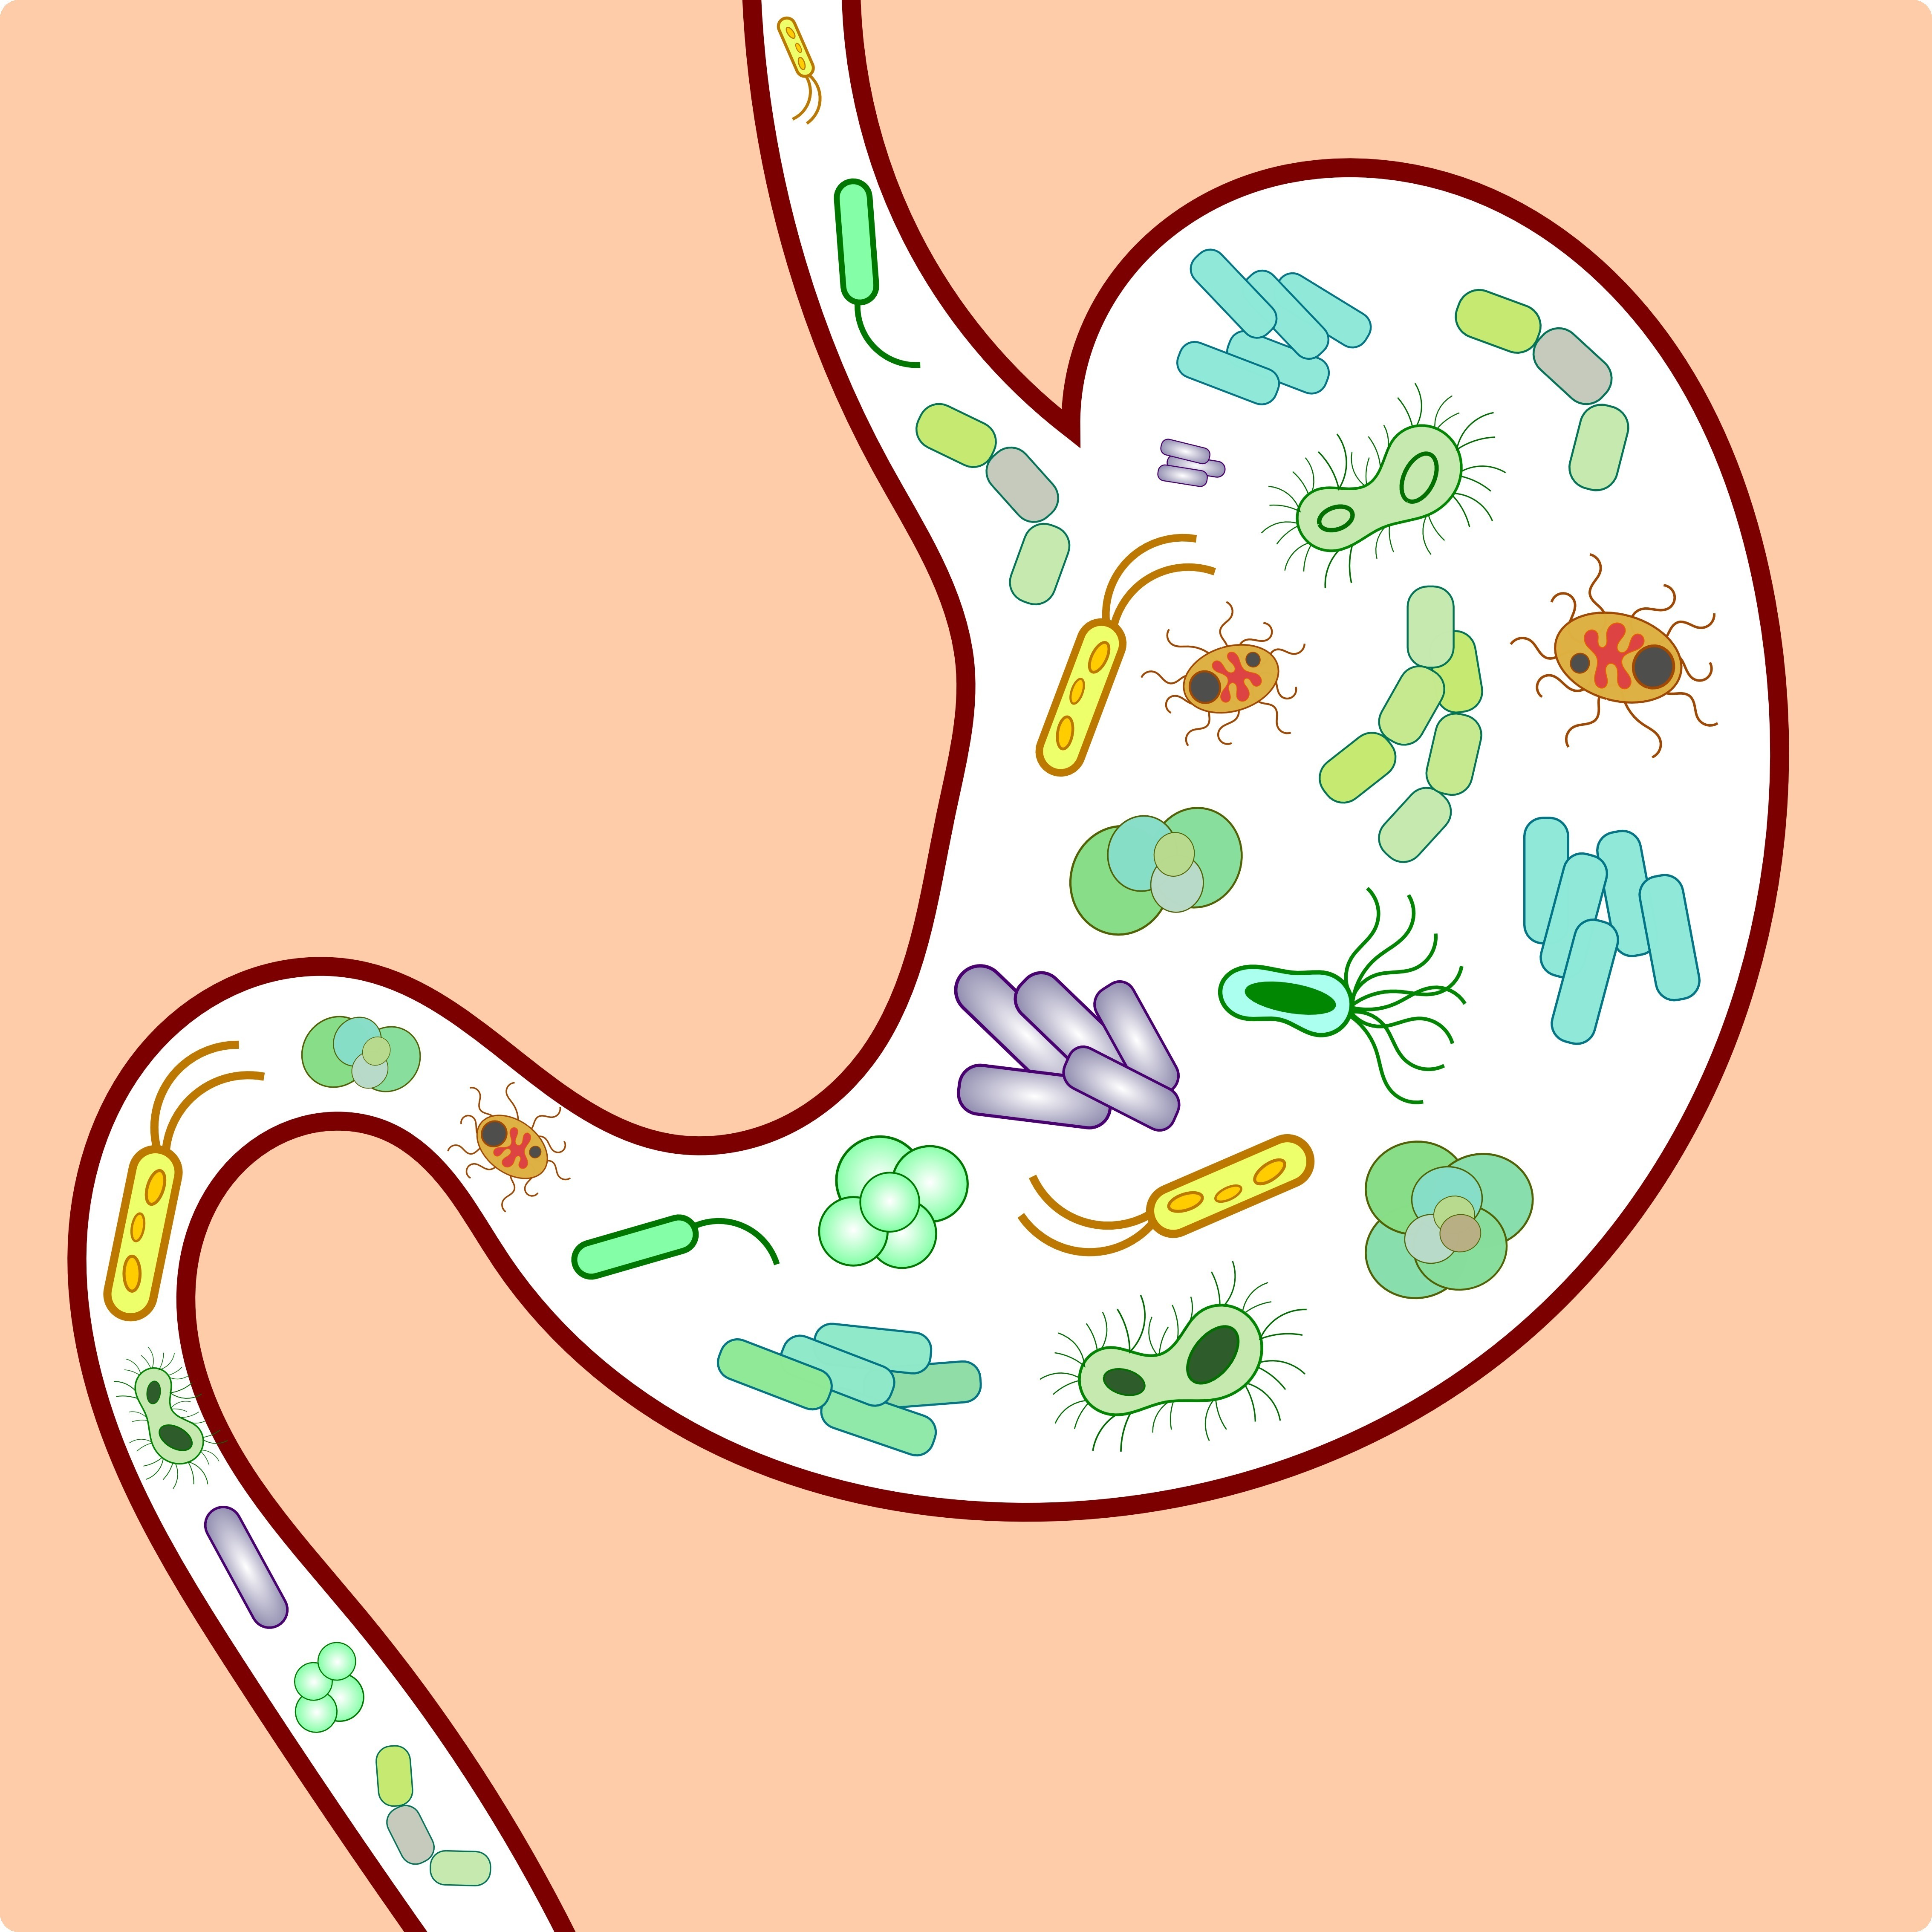 The digestive tract which consists of trillions of bacteria, viruses and fungi.